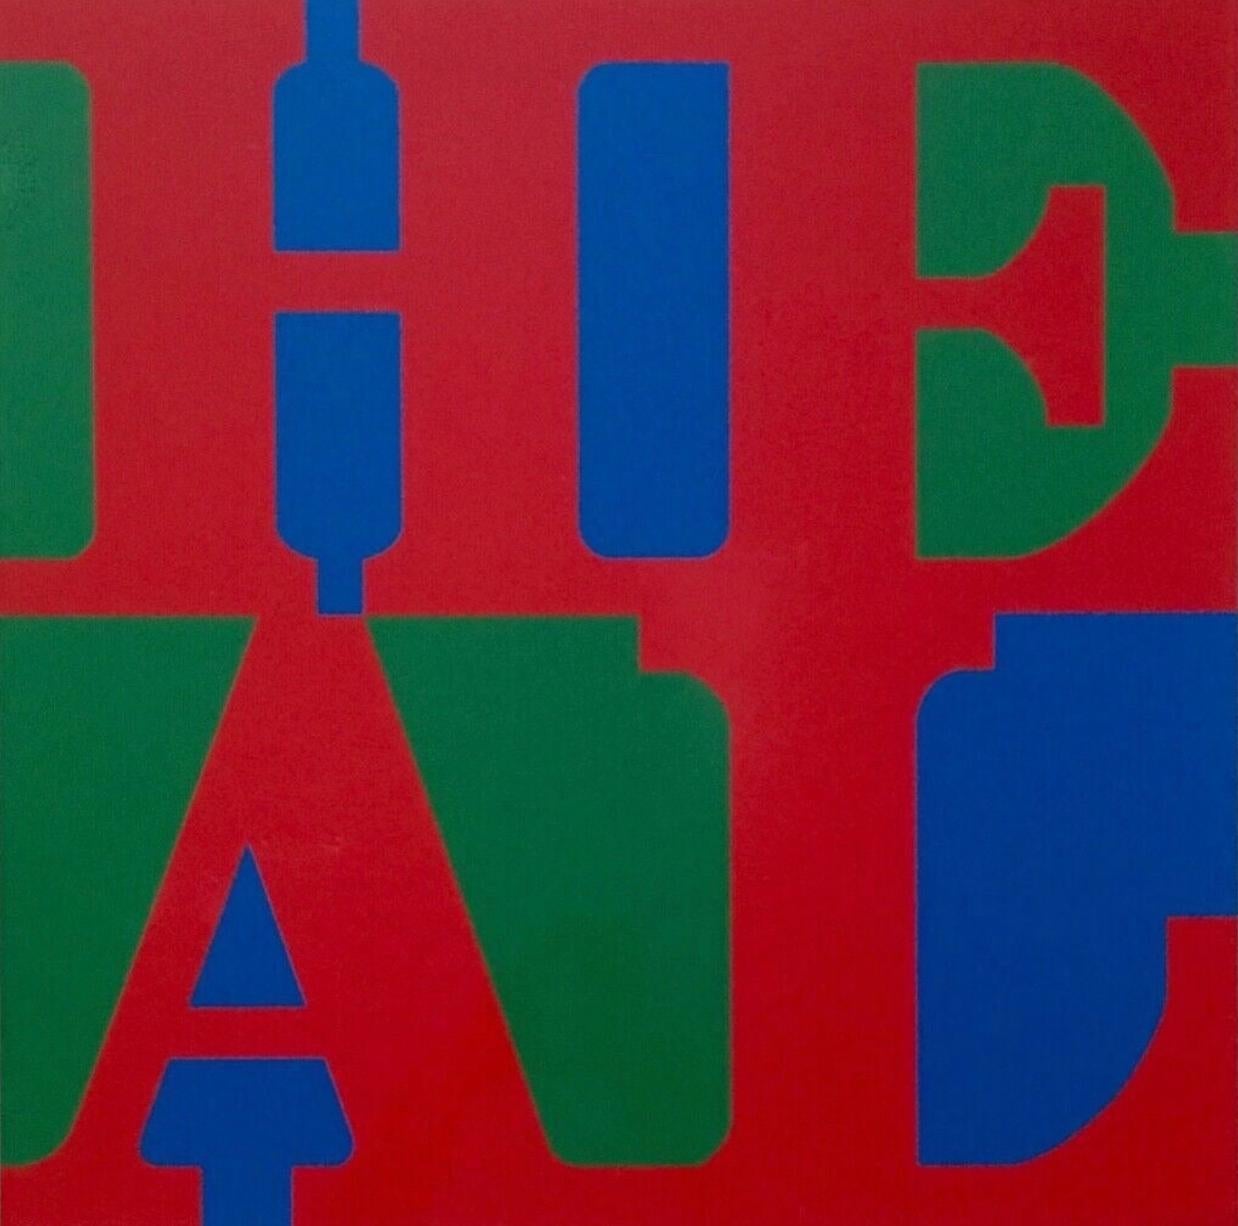 Artist: Robert Indiana (1928-2018)
Title: HEAL (Red, Green, Blue Variation)
Year: 2015
Medium: Silkscreen in 3 colors on 2-Ply Museum Board
Edition: 20, plus proofs
Size: 33 x 32 inches
Condition: Excellent
Inscription: Hand initialed/signed and